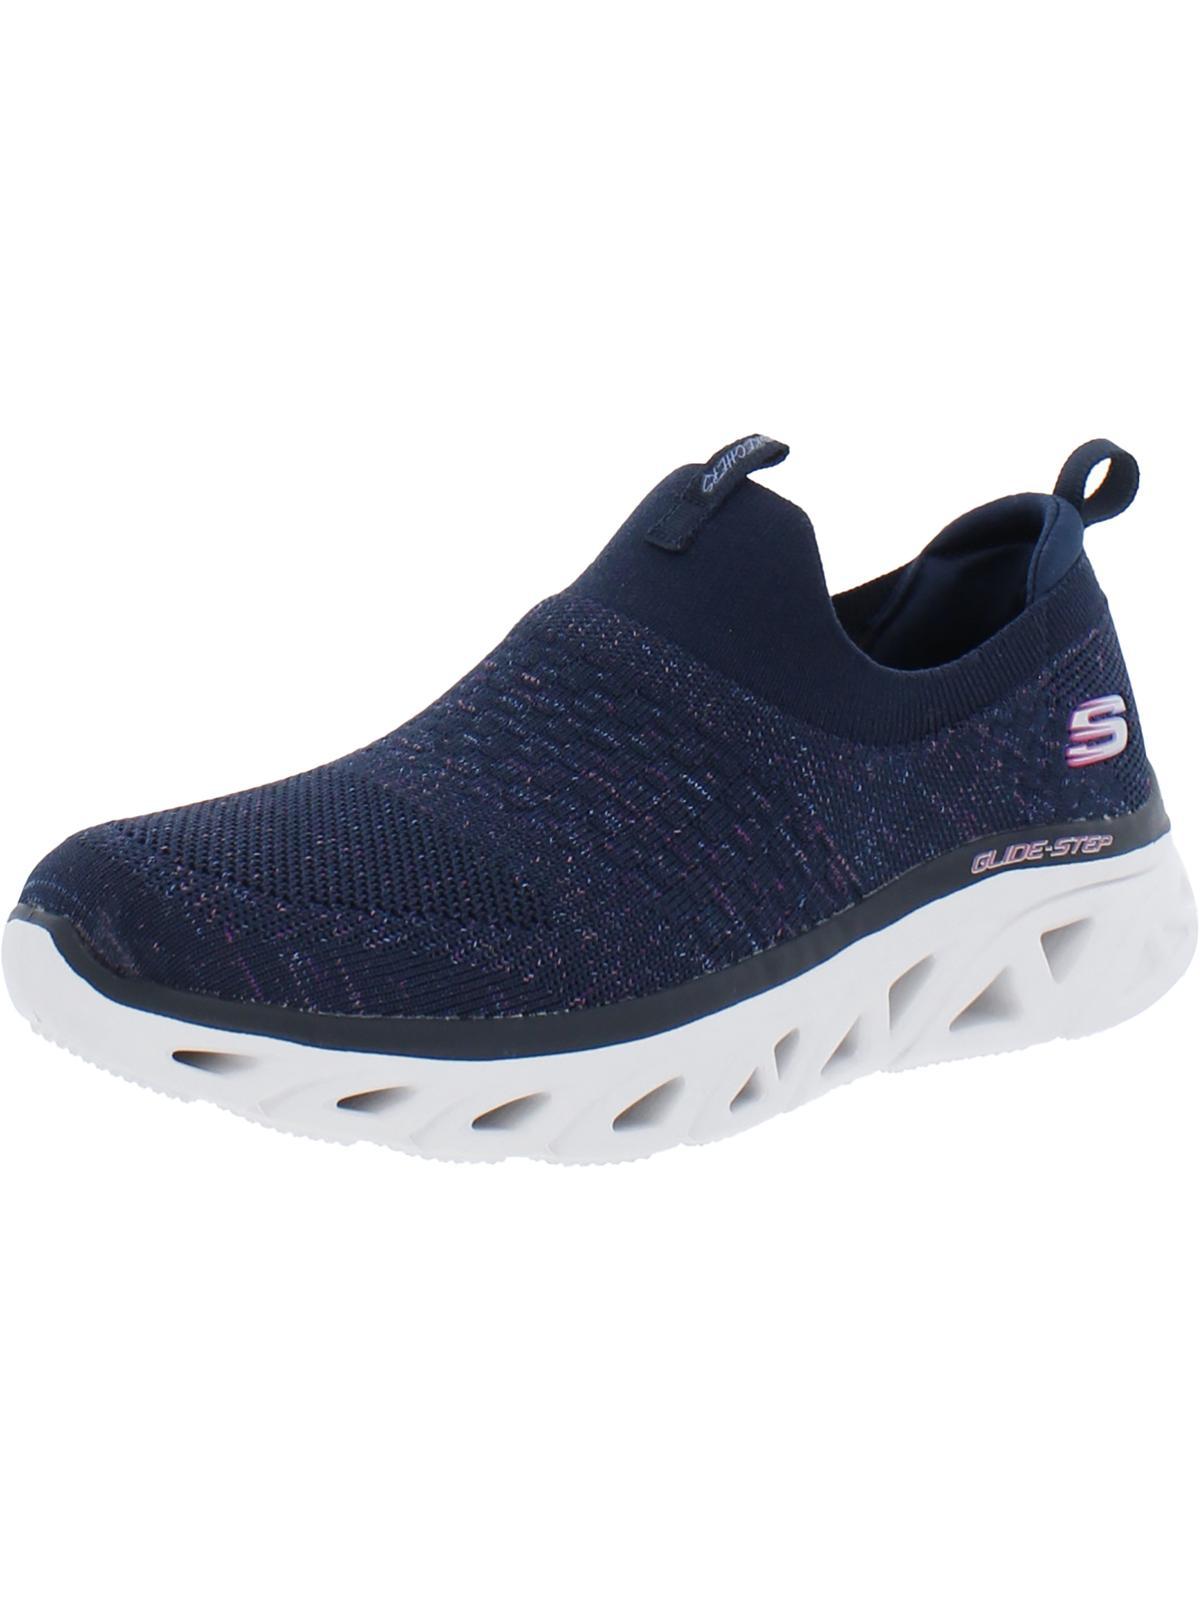 Skechers Glide Step Sport- Lively Glow Relaxed Fit Slip On Walking Shoes in  Blue | Lyst